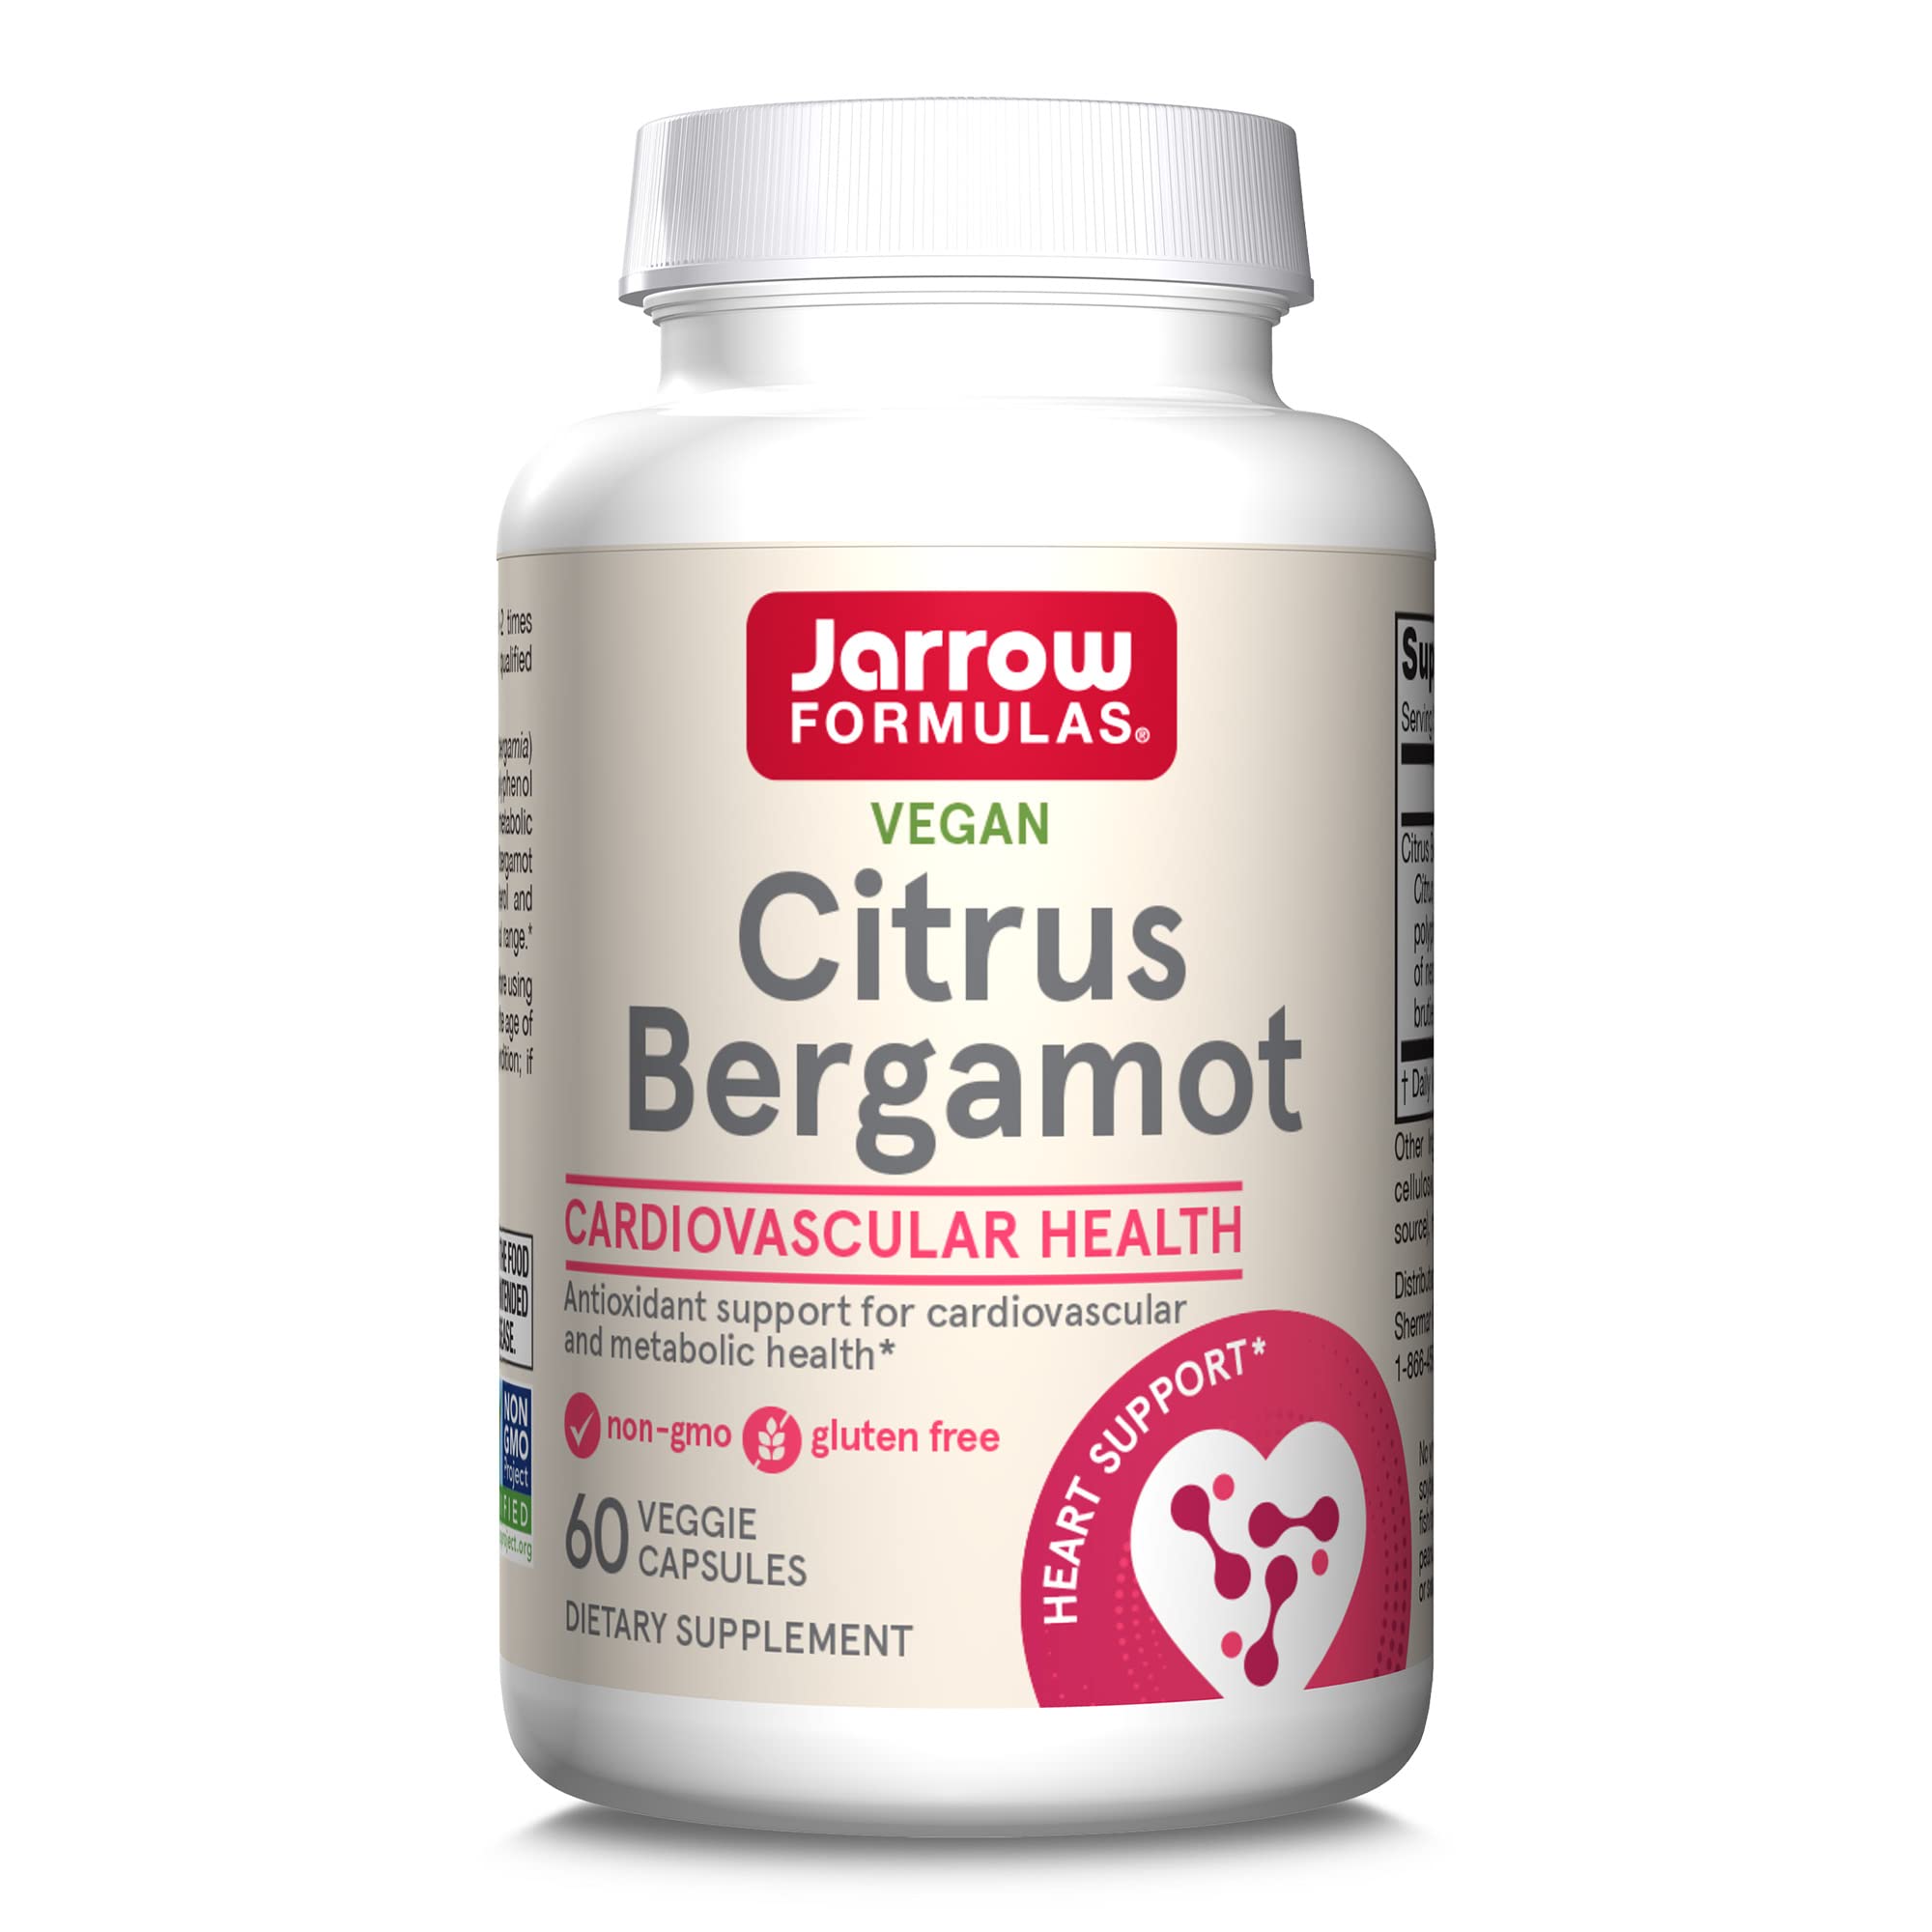 Book Cover Jarrow Formulas Citrus Bergamot 500 mg - 60 Servings (Veggie Caps) - Antioxidant Support for Cardiovascular & Metabolic Health - Dietary Supplement - Gluten Free - Use with Jarrow Formulas QH-Absorb 60.0 Servings (Pack of 1)